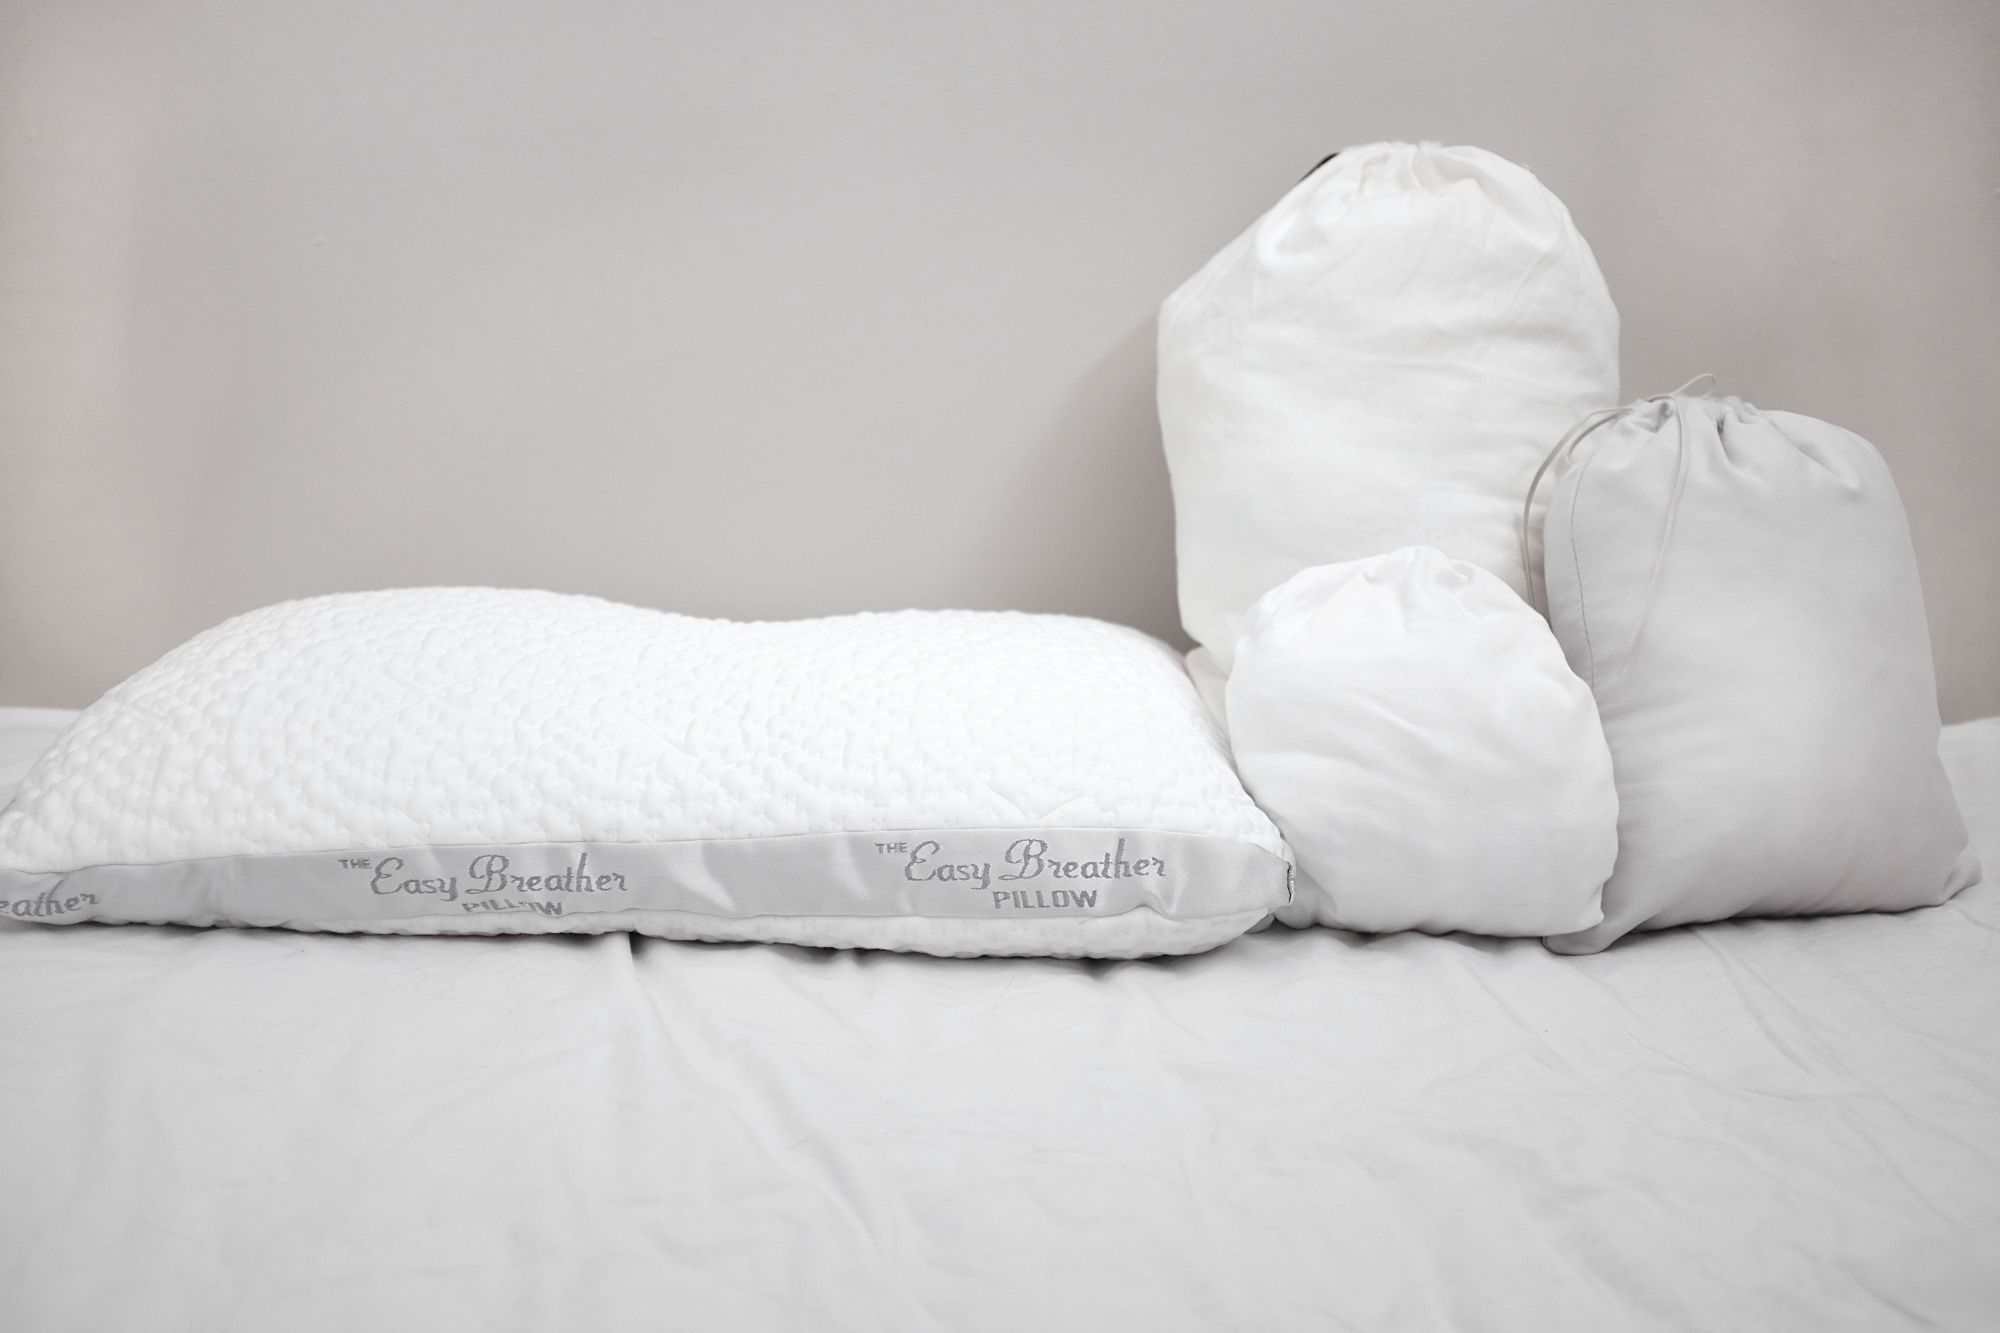 The Easy Breather Pillow next to bags of extra stuffing